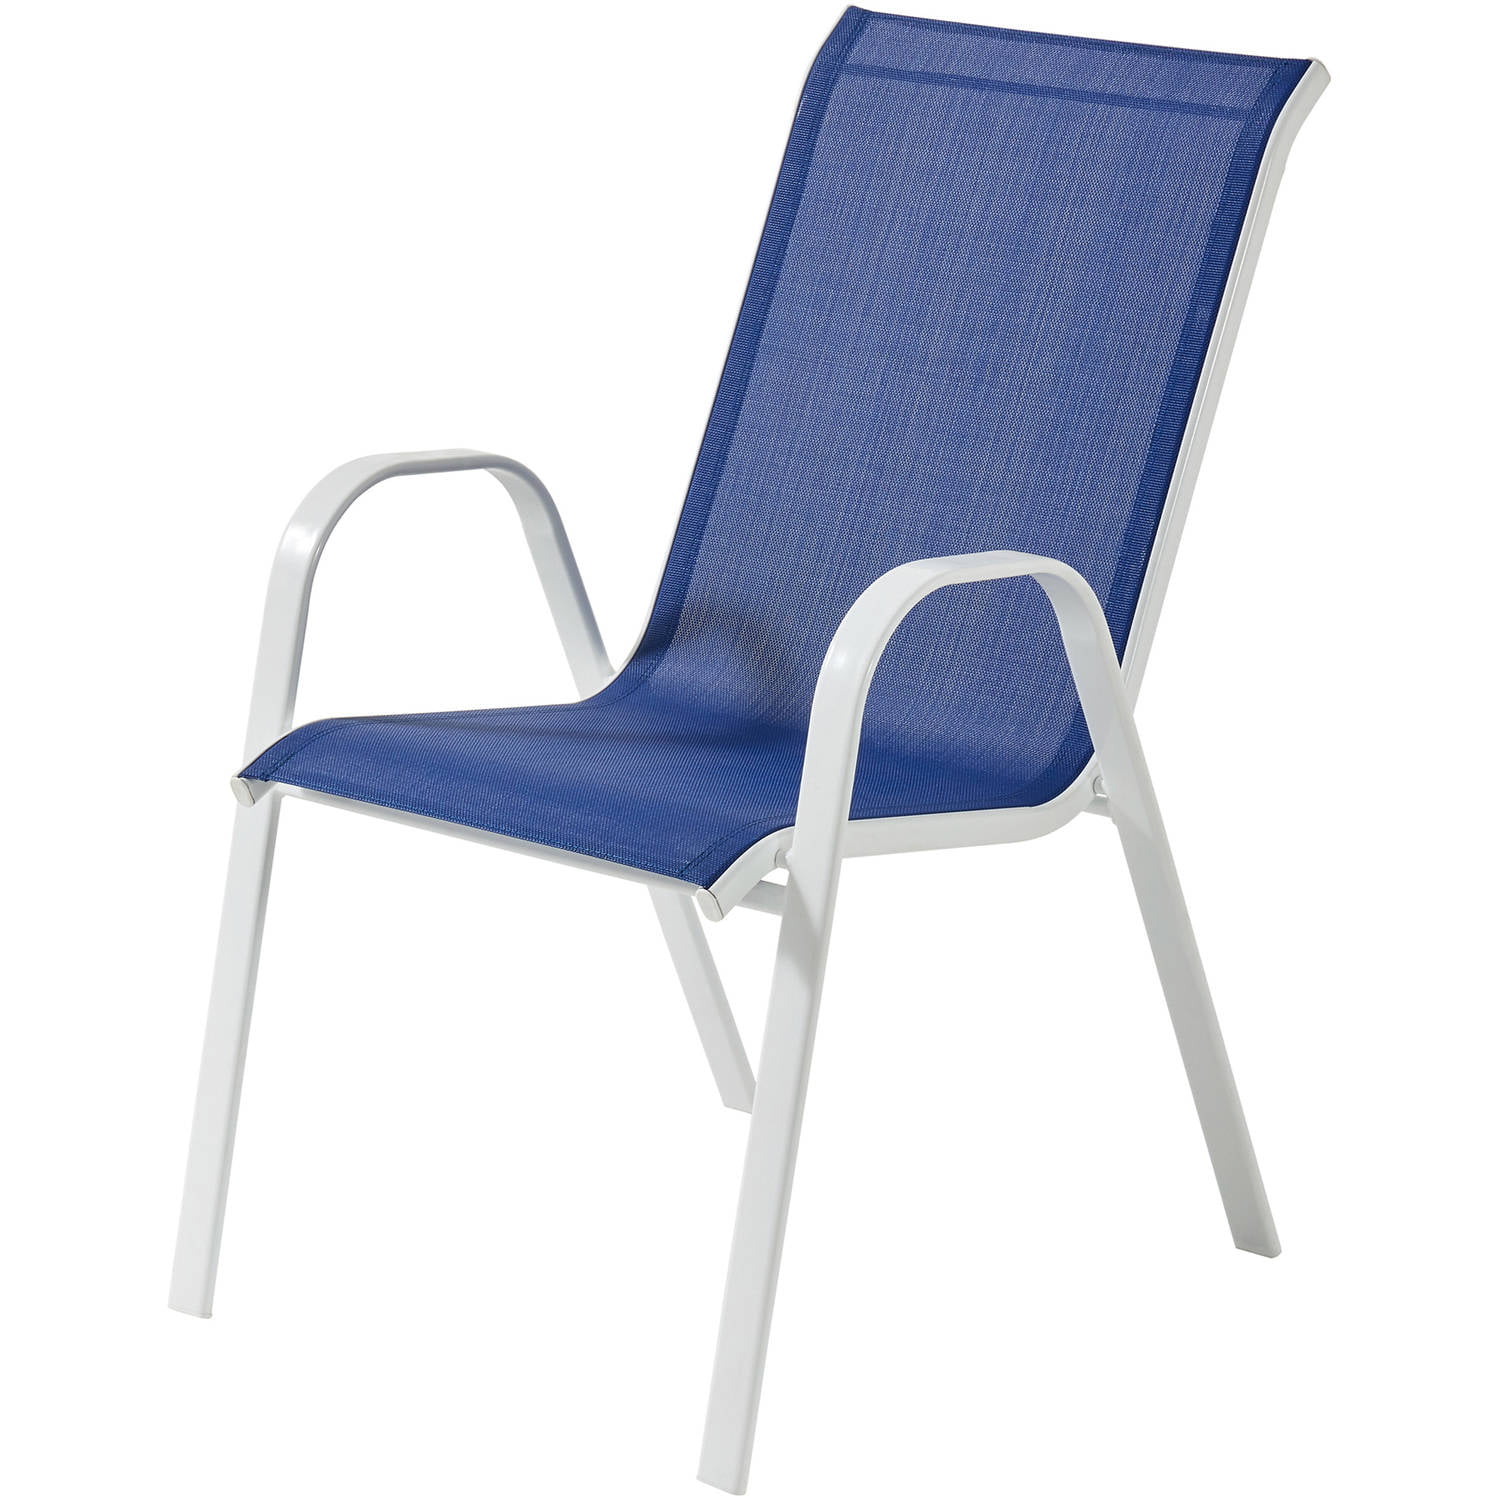 Mainstays Stack Mesh Chair Blue, How To Clean Outdoor Mesh Chairs